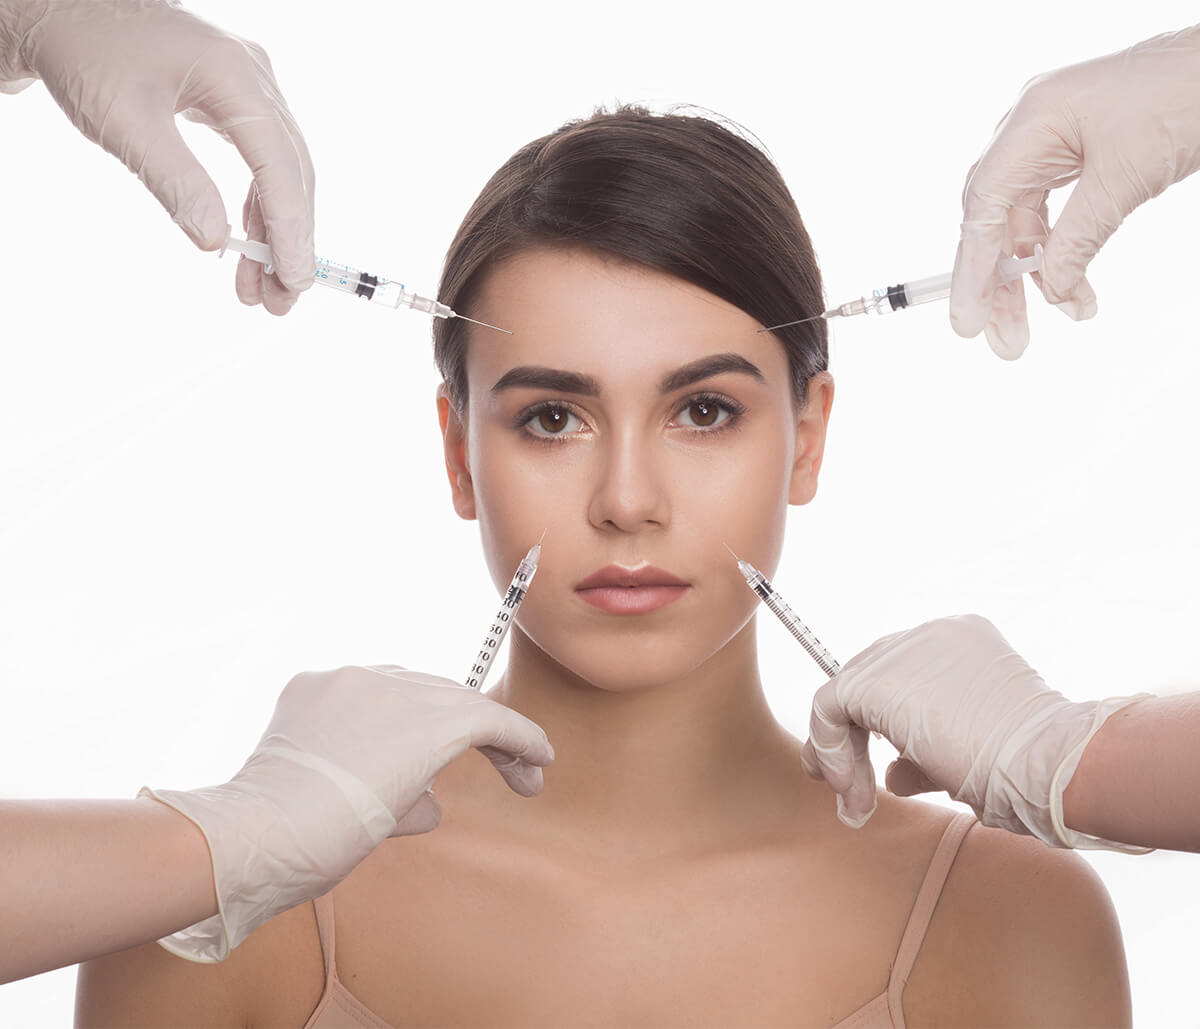 Where to Get Botox in Elk Grove Area